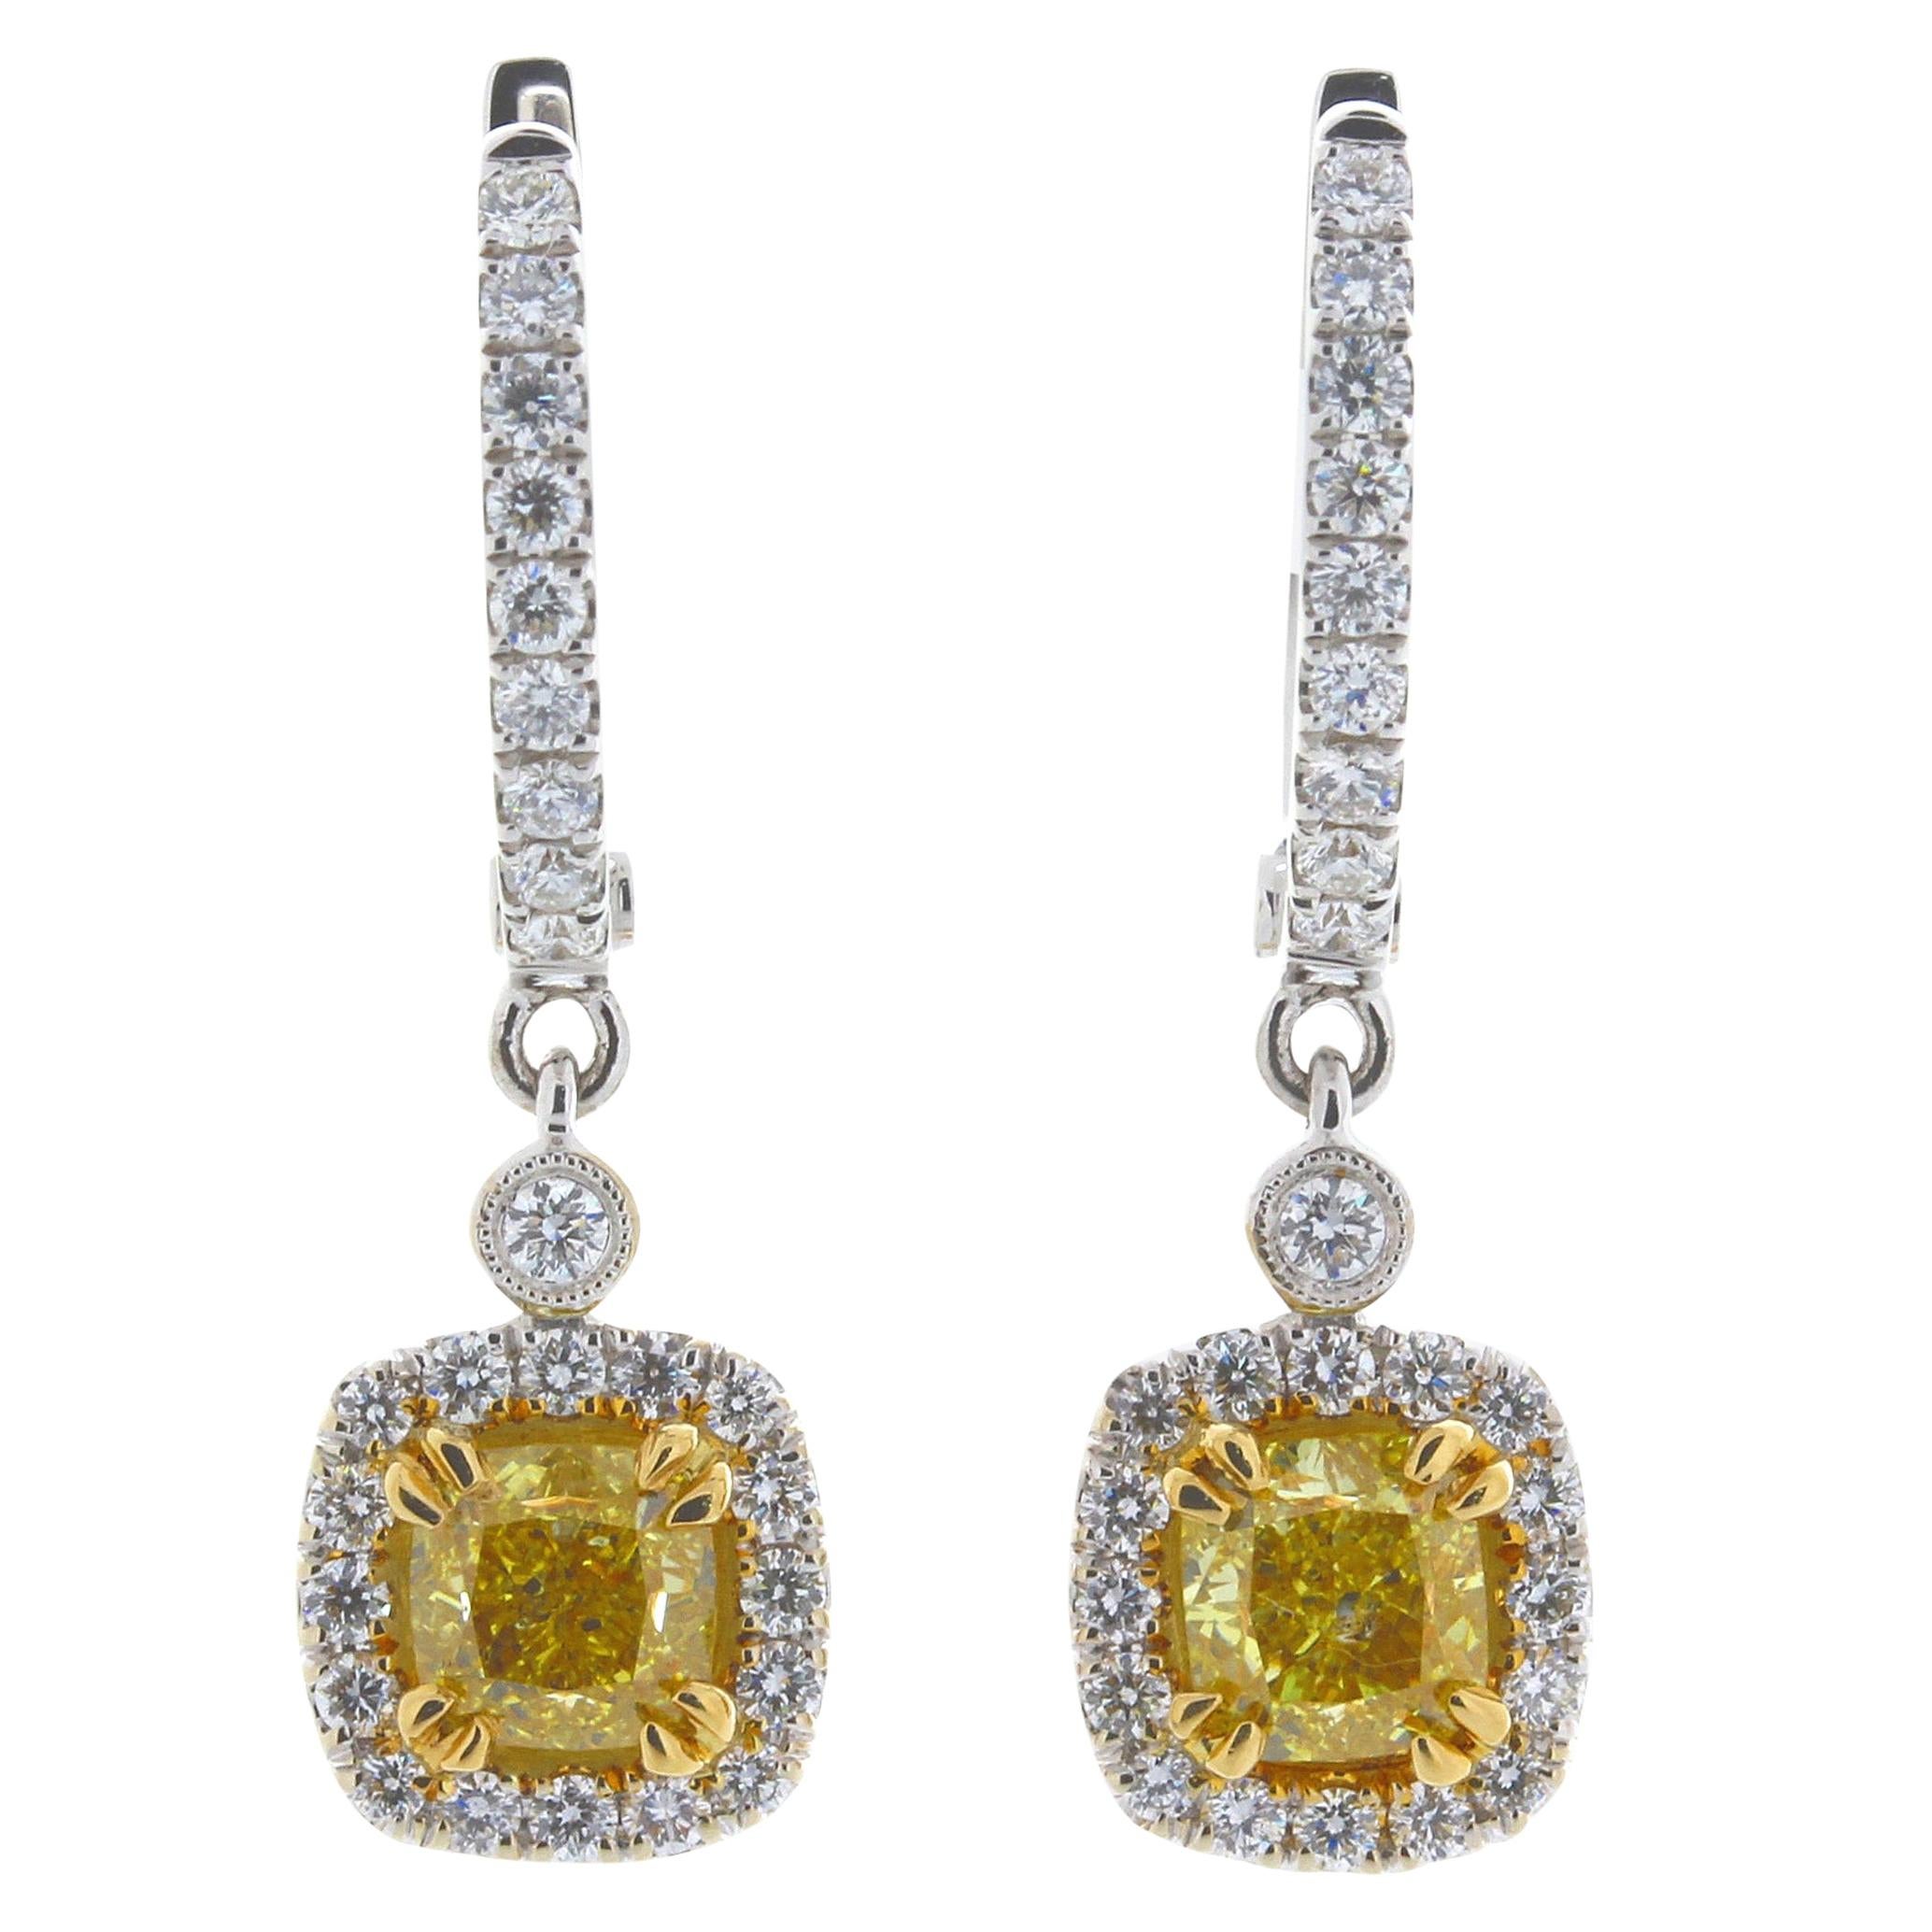 2.01 Carat Total Weight Cushion Natural Fancy Vivid Yellow Diamond 18K Earrings For Sale